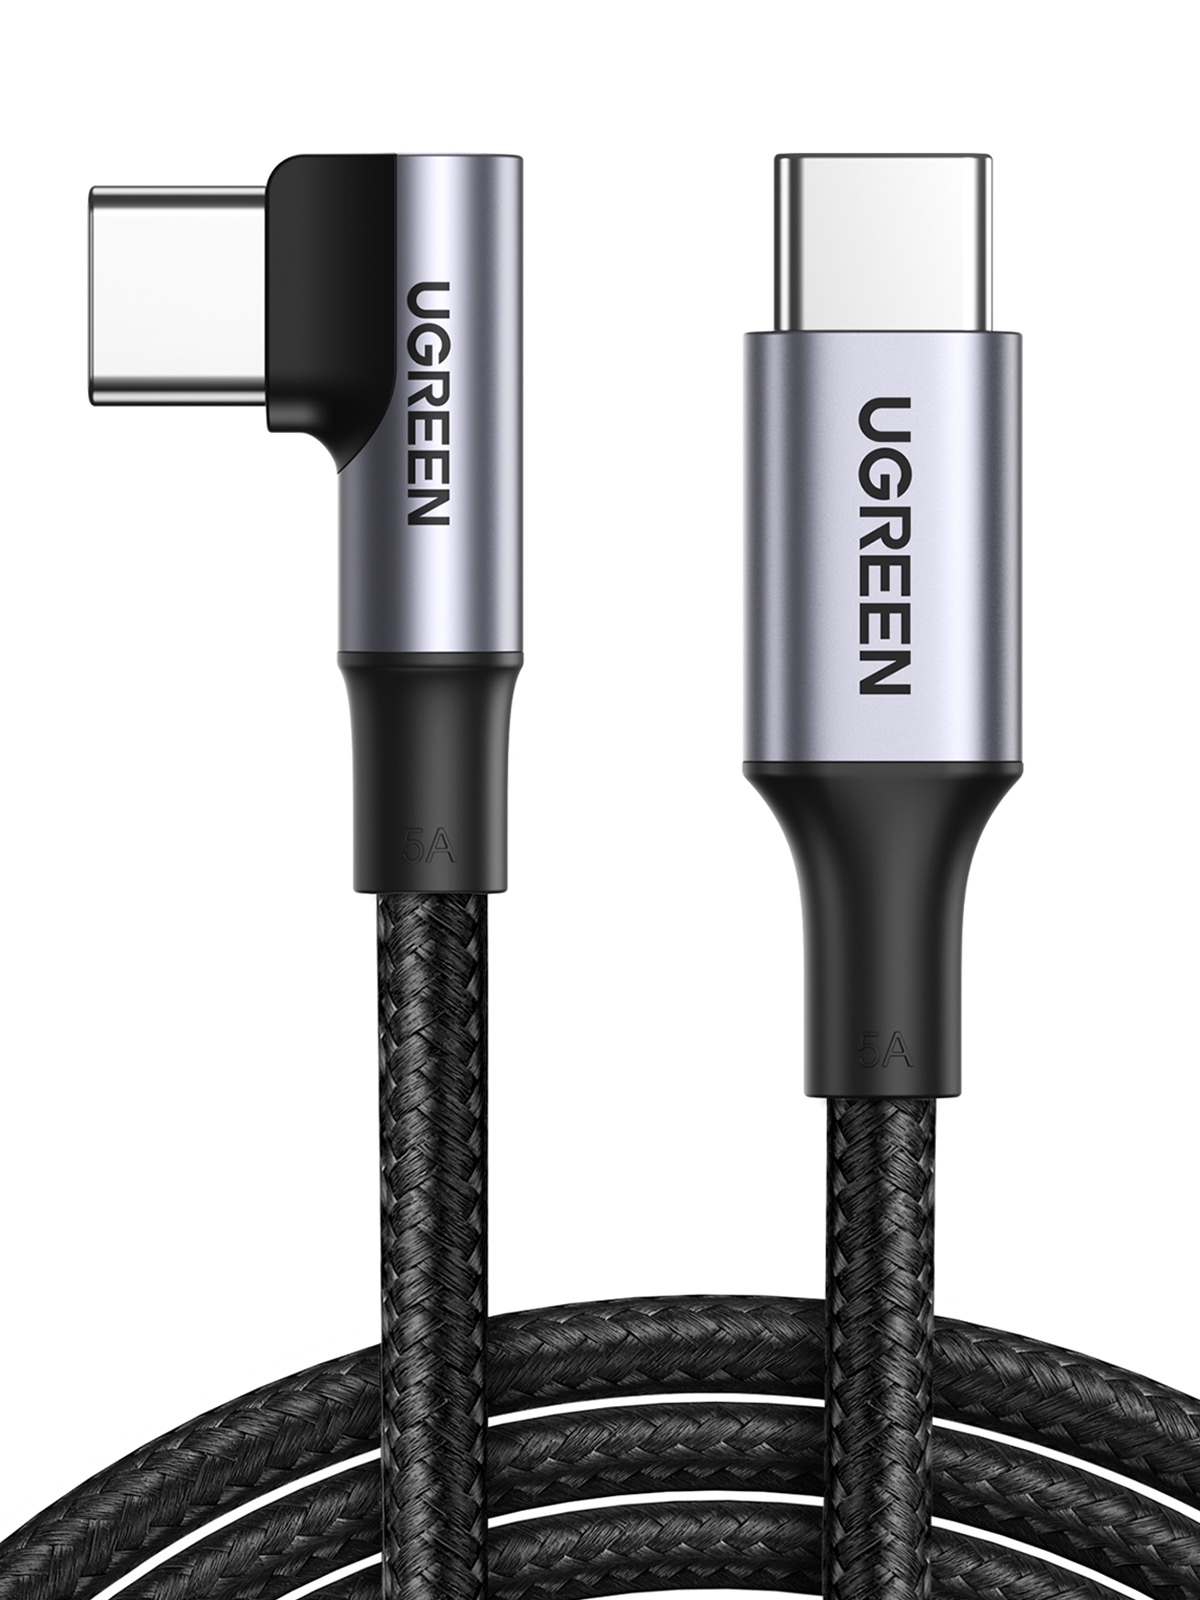 UGREEN USB-C 2.0 to Angled USB-C M/M Cable Aluminium Shell with Braided 3m (Black)